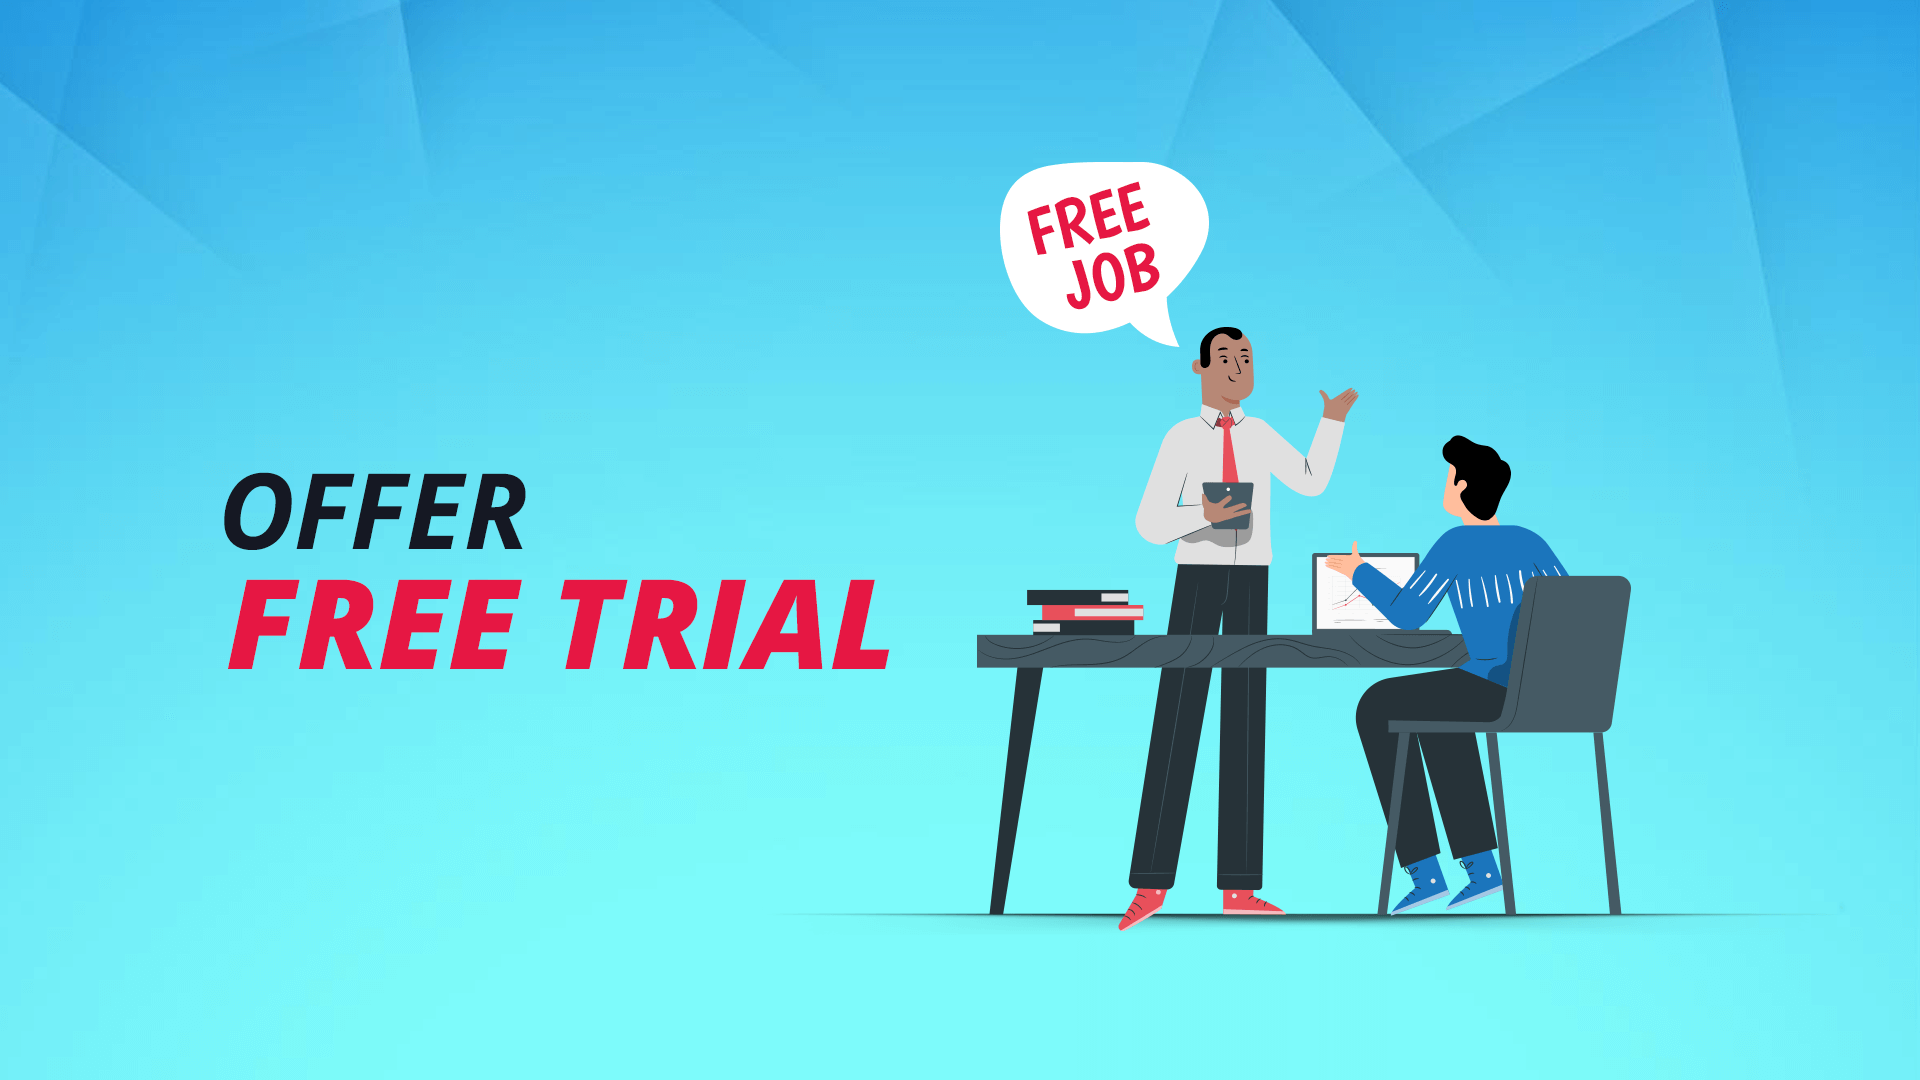 Offer Free Trial